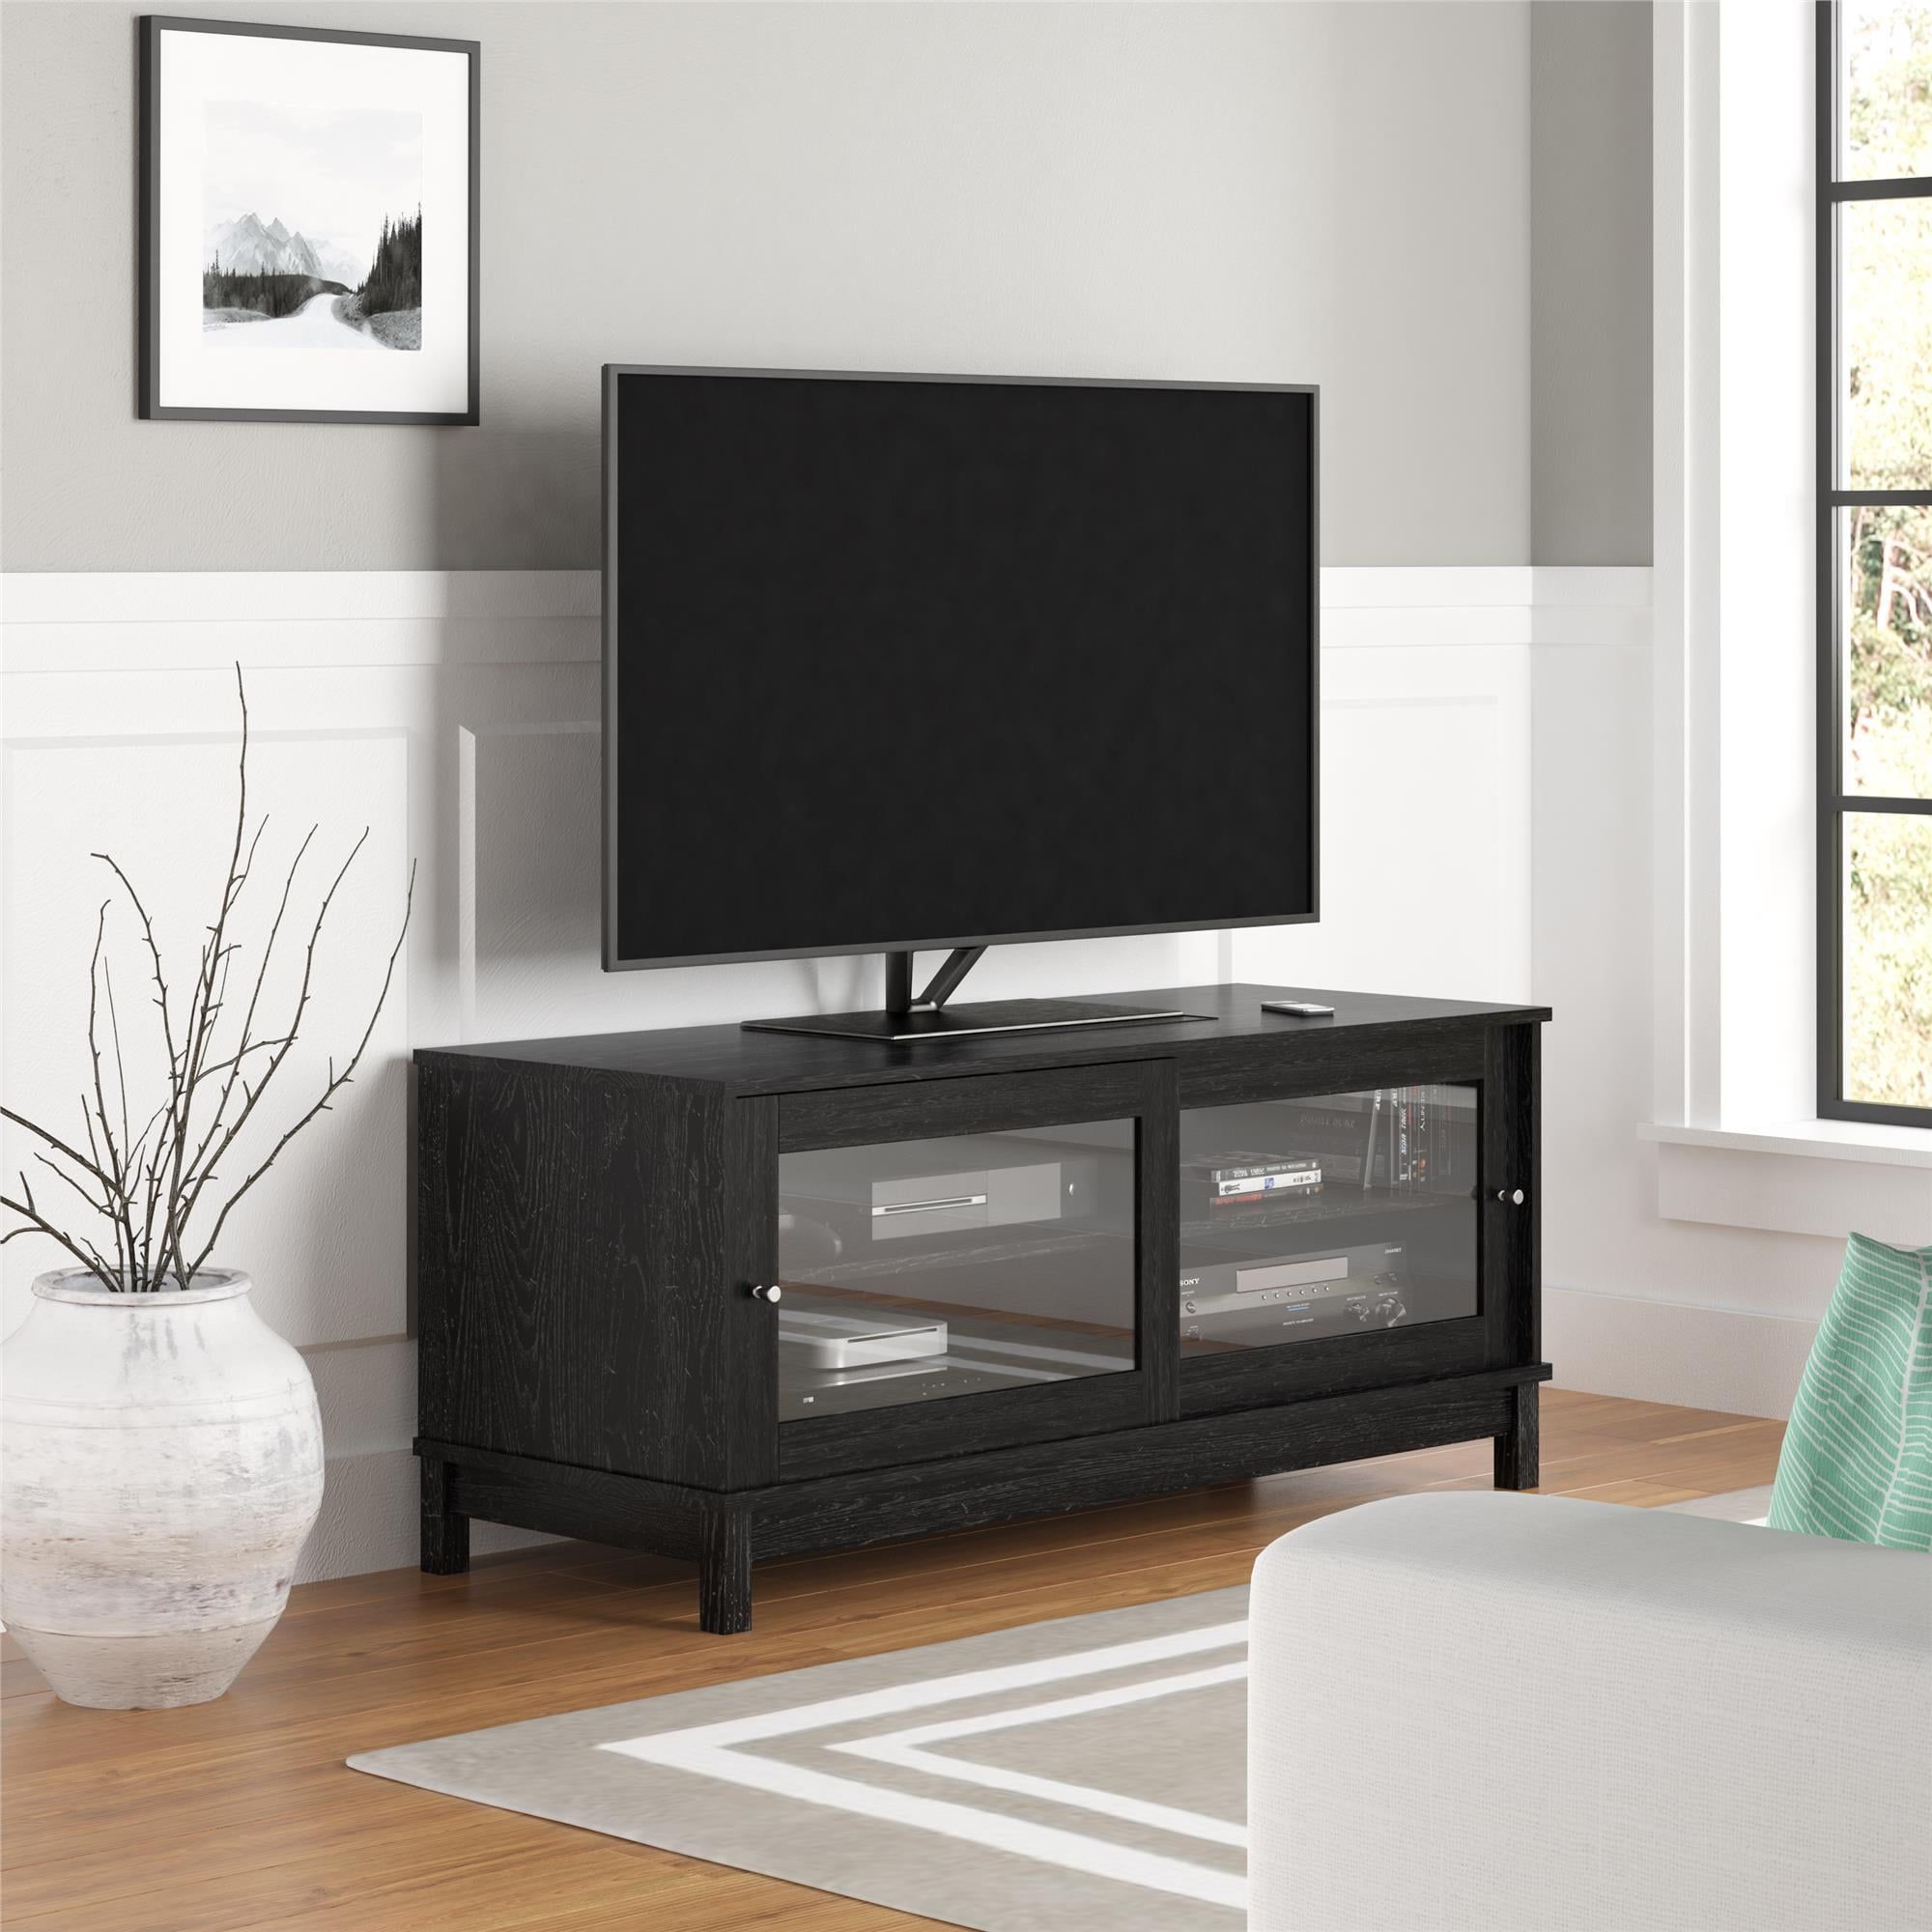 Mainstays Tv Stand For Tvs Up To 55", Multiple Finishes – Black In Dual Use Storage Cabinet Tv Stands (View 10 of 20)